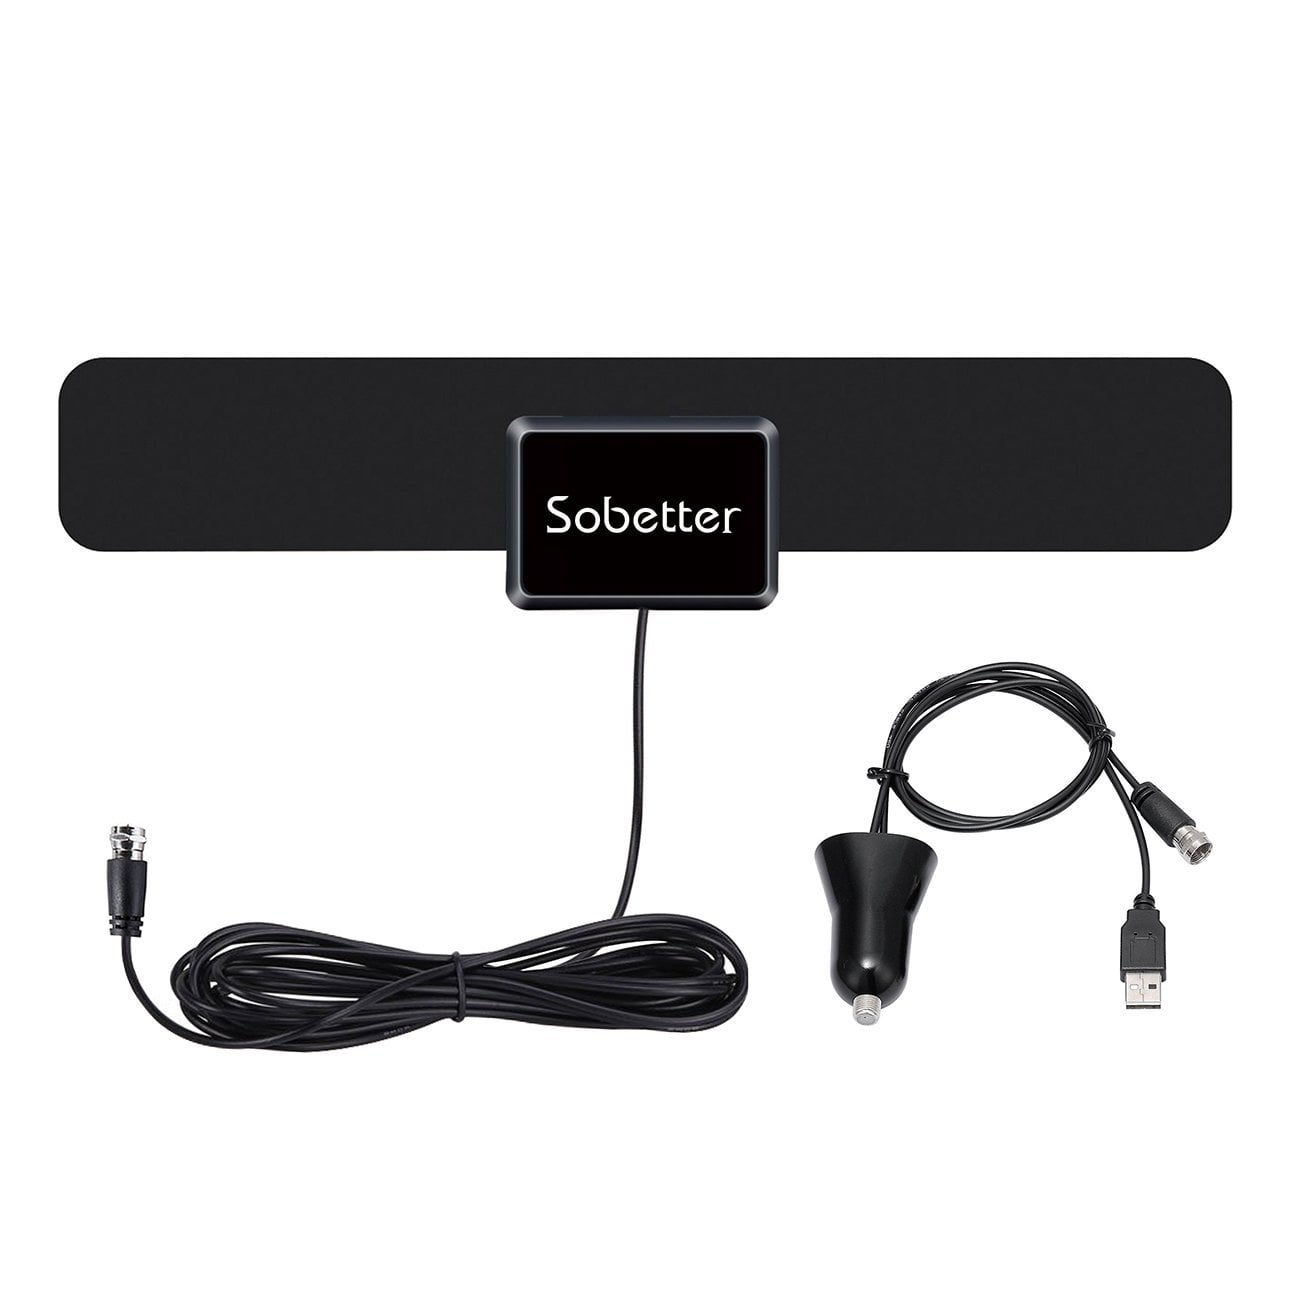 USB Power Supply,13.2ft Coax Cable,Support 1080p Black&White Sobetter 50 Mile Range Indoor TV Antenna with Detachable Amplifier Signal Booster 